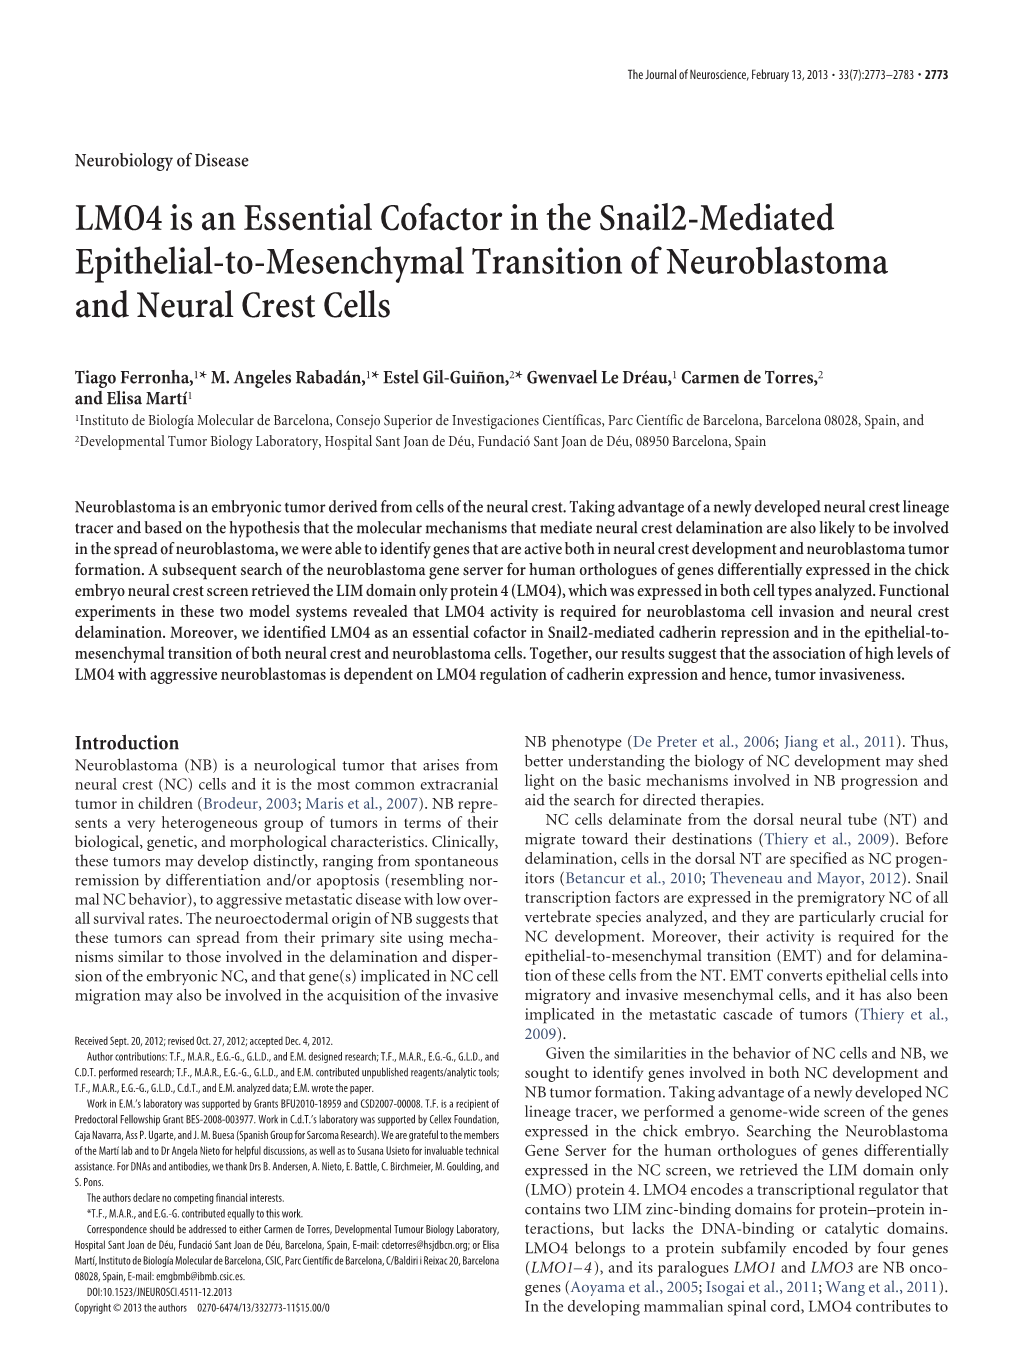 LMO4 Is an Essential Cofactor in the Snail2-Mediated Epithelial-To-Mesenchymal Transition of Neuroblastoma and Neural Crest Cells